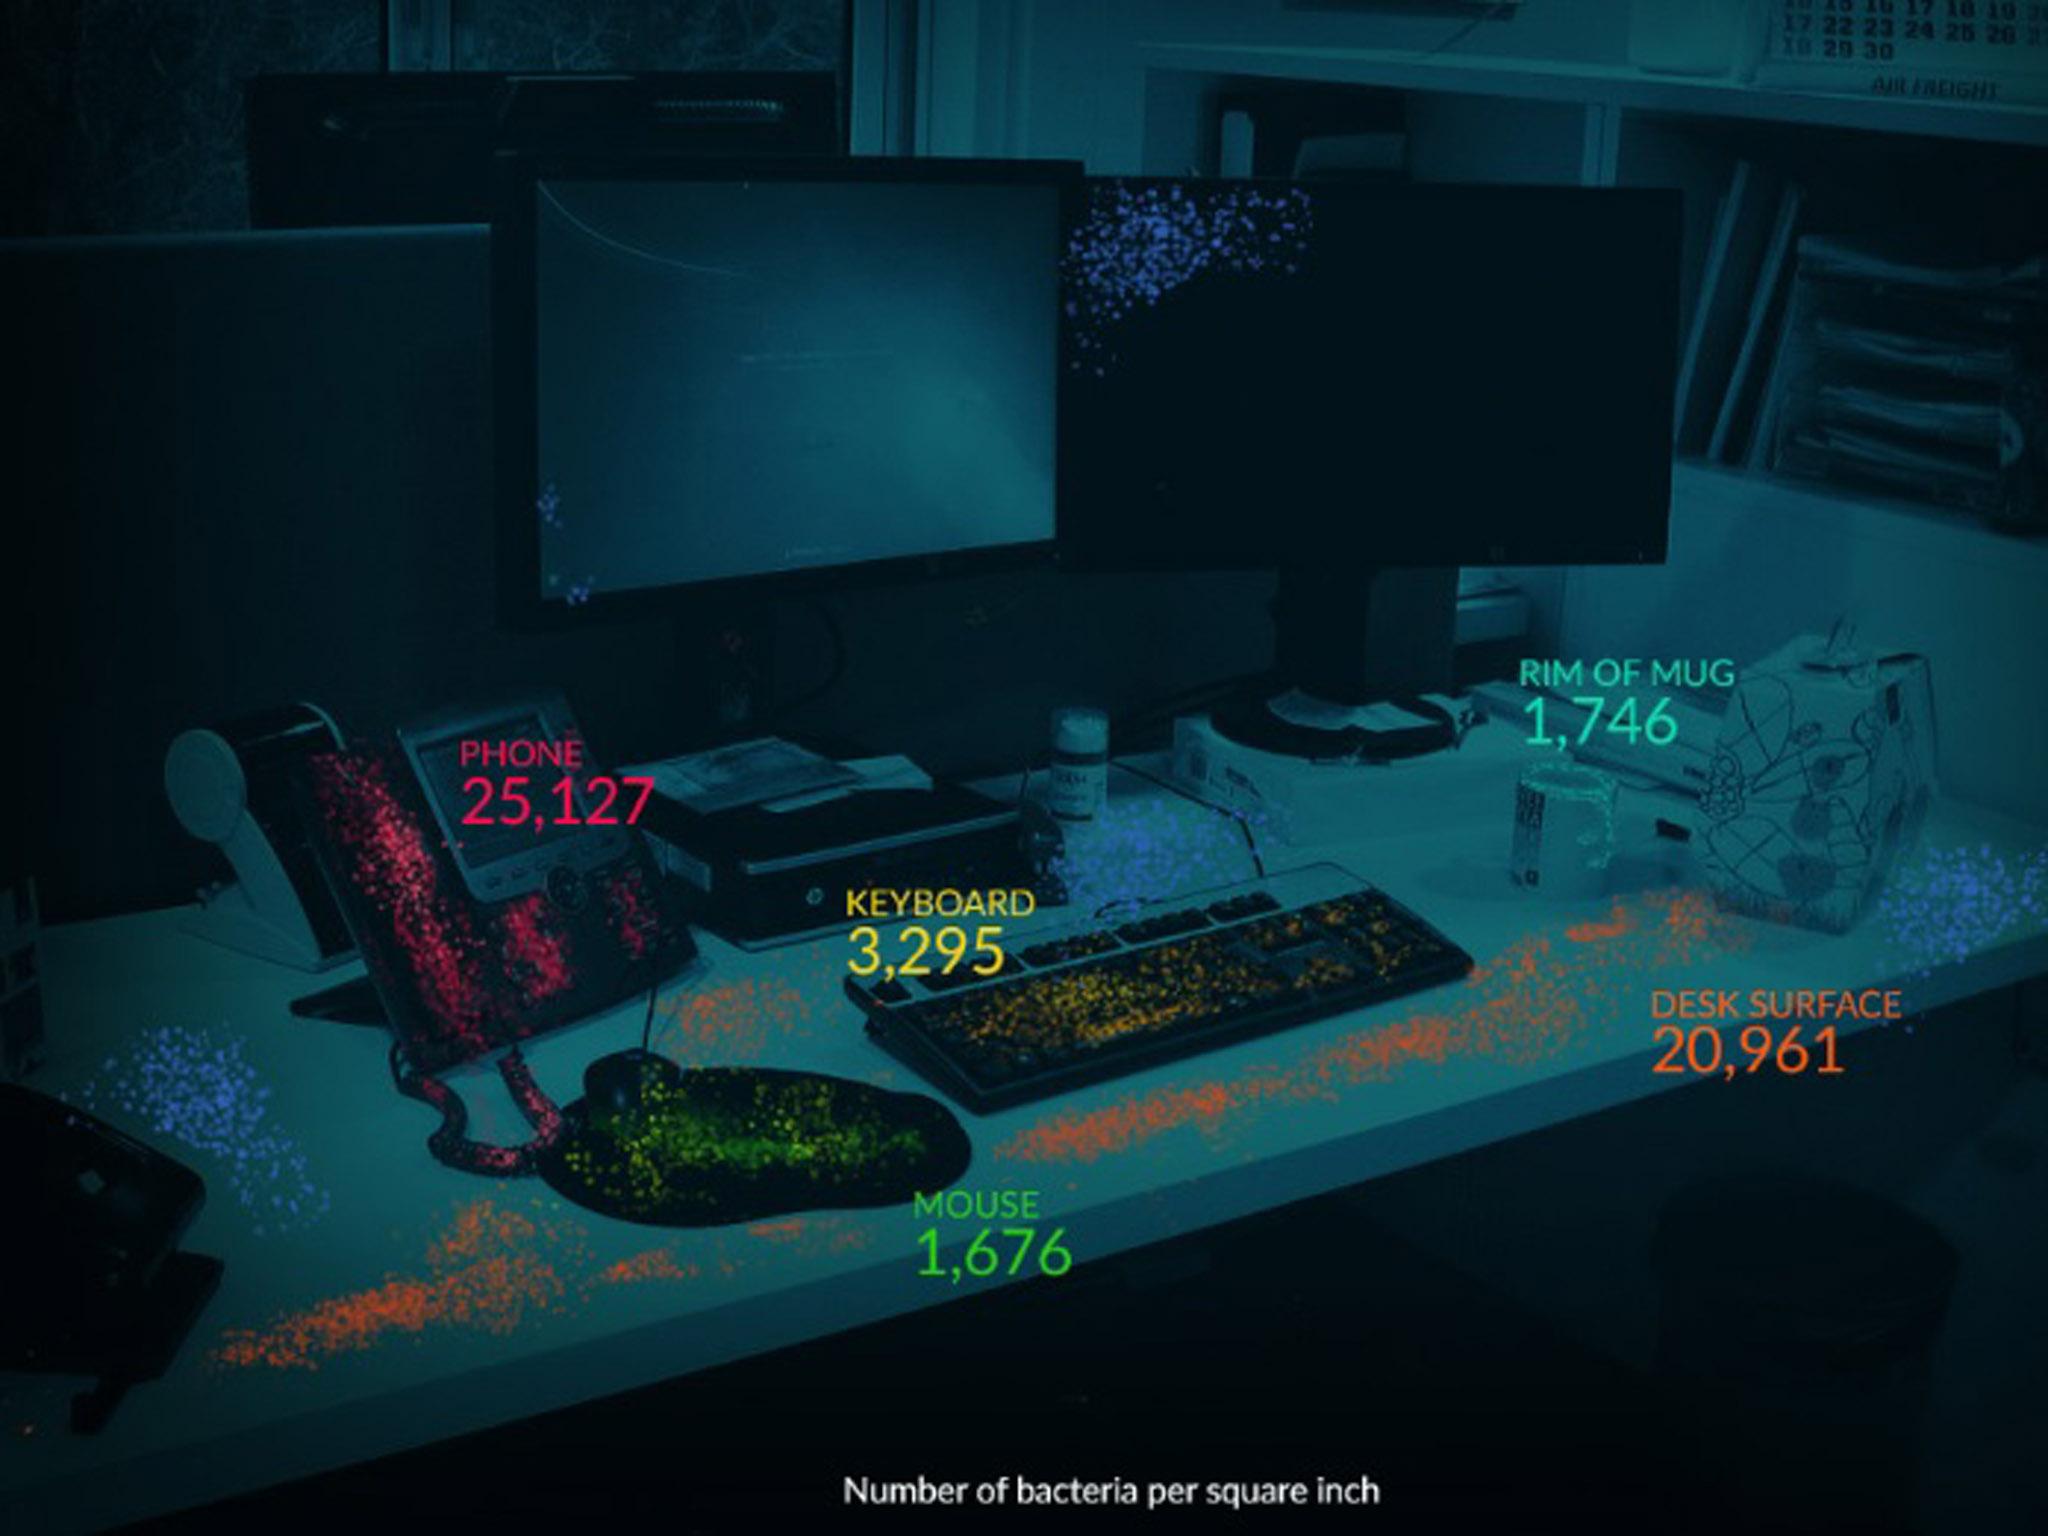 Tens of thousands of bacteria can be seen on the desk